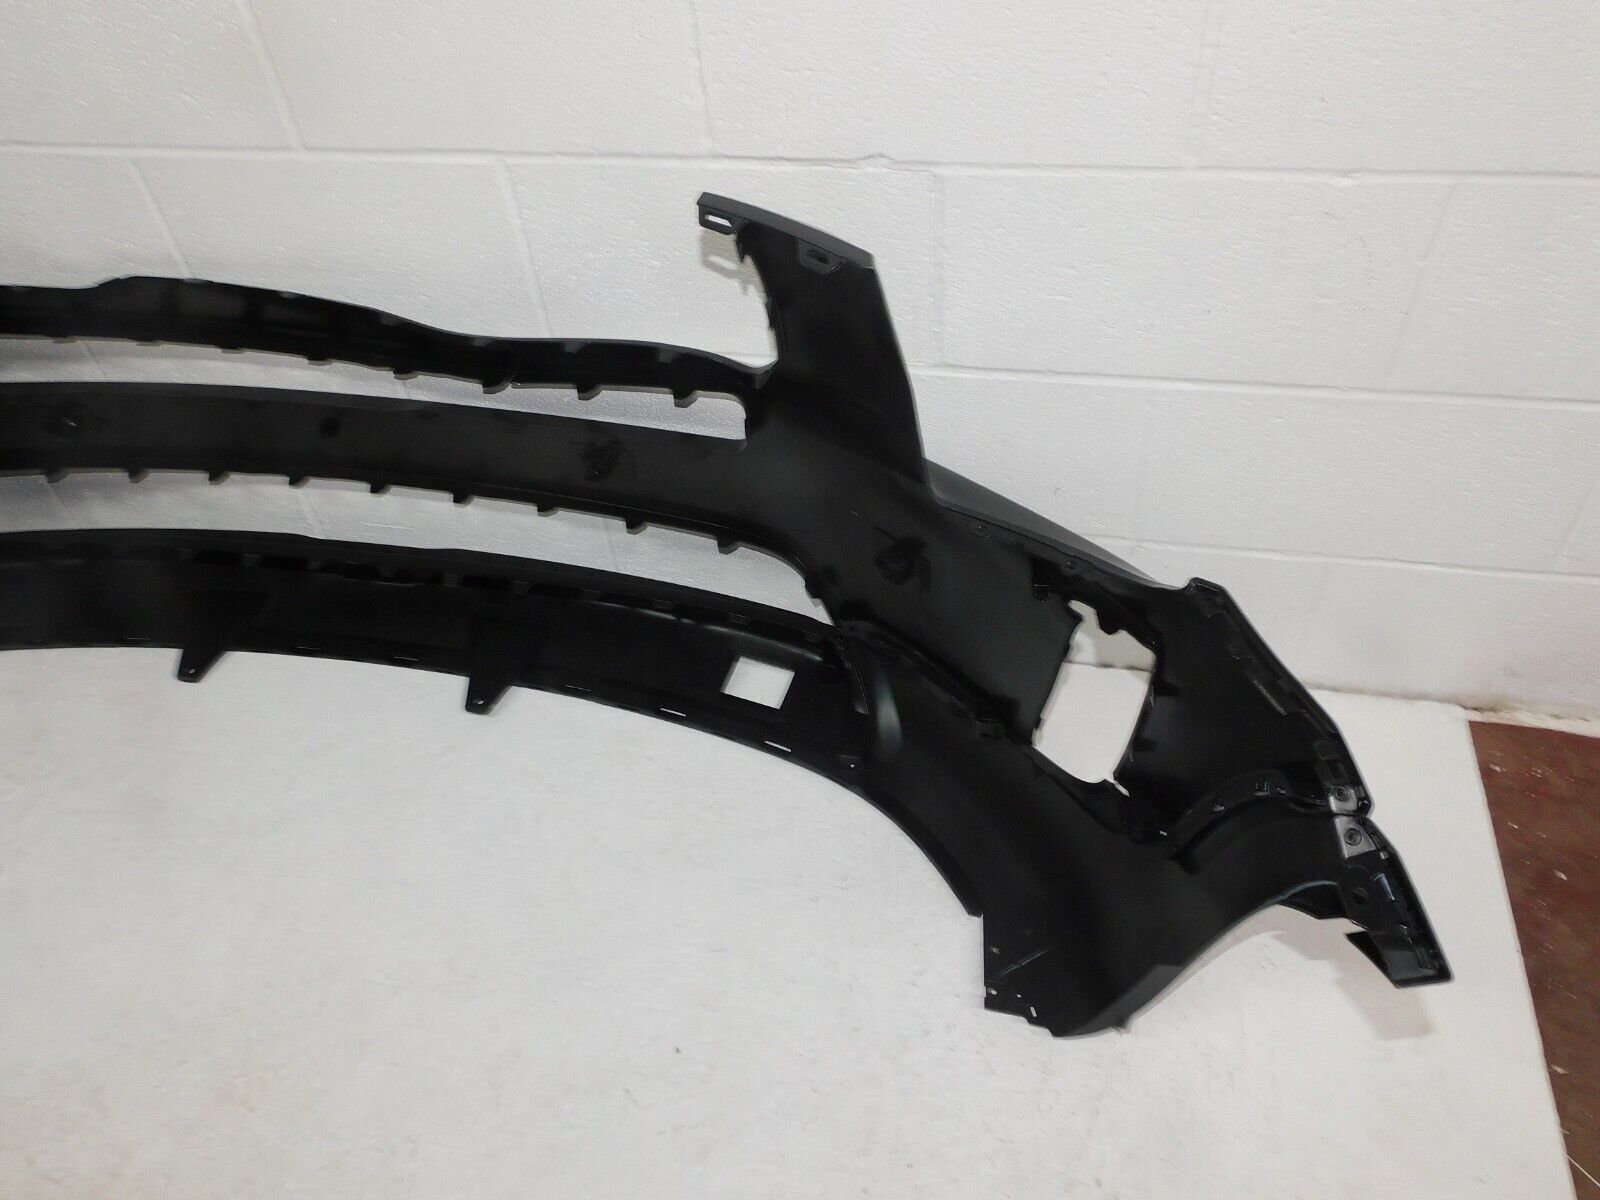 Used 2020 2022 Kia Telluride Front Bumper Cover Oem With Sensor Holes For Sale 86511 S9000 1472